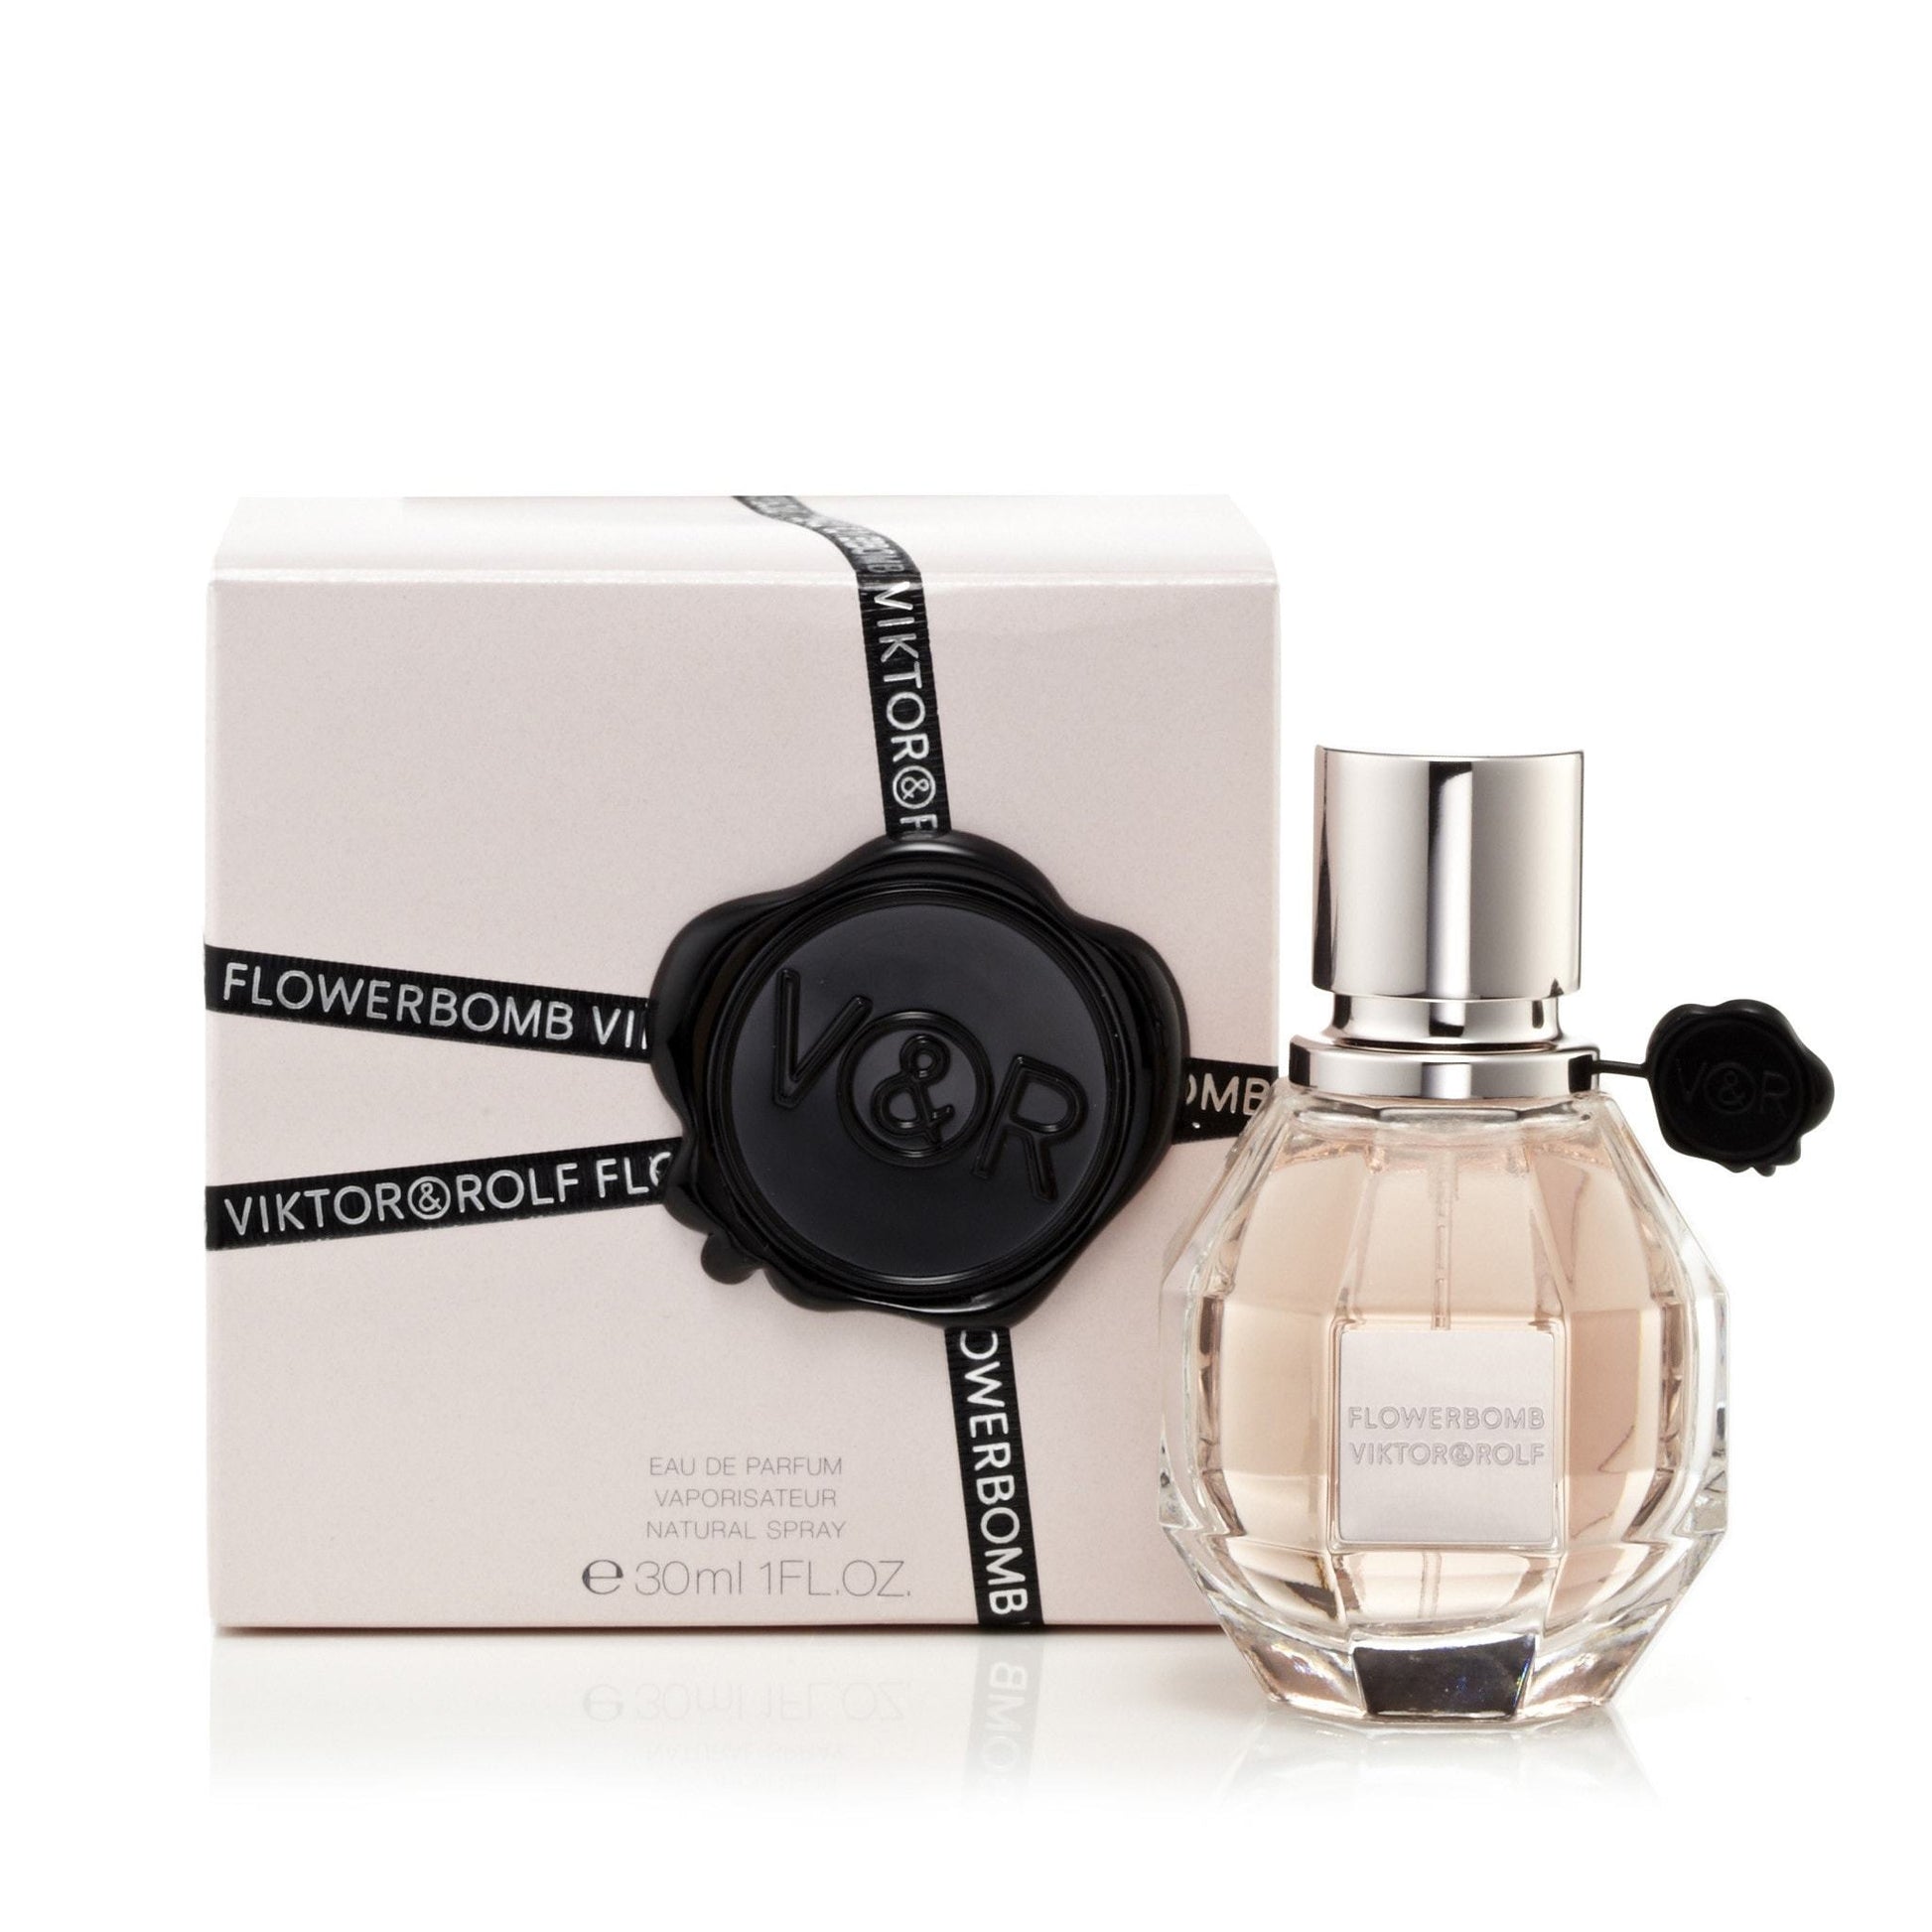 Flowerbomb EDP for Women by Viktor & Rolf, Product image 6